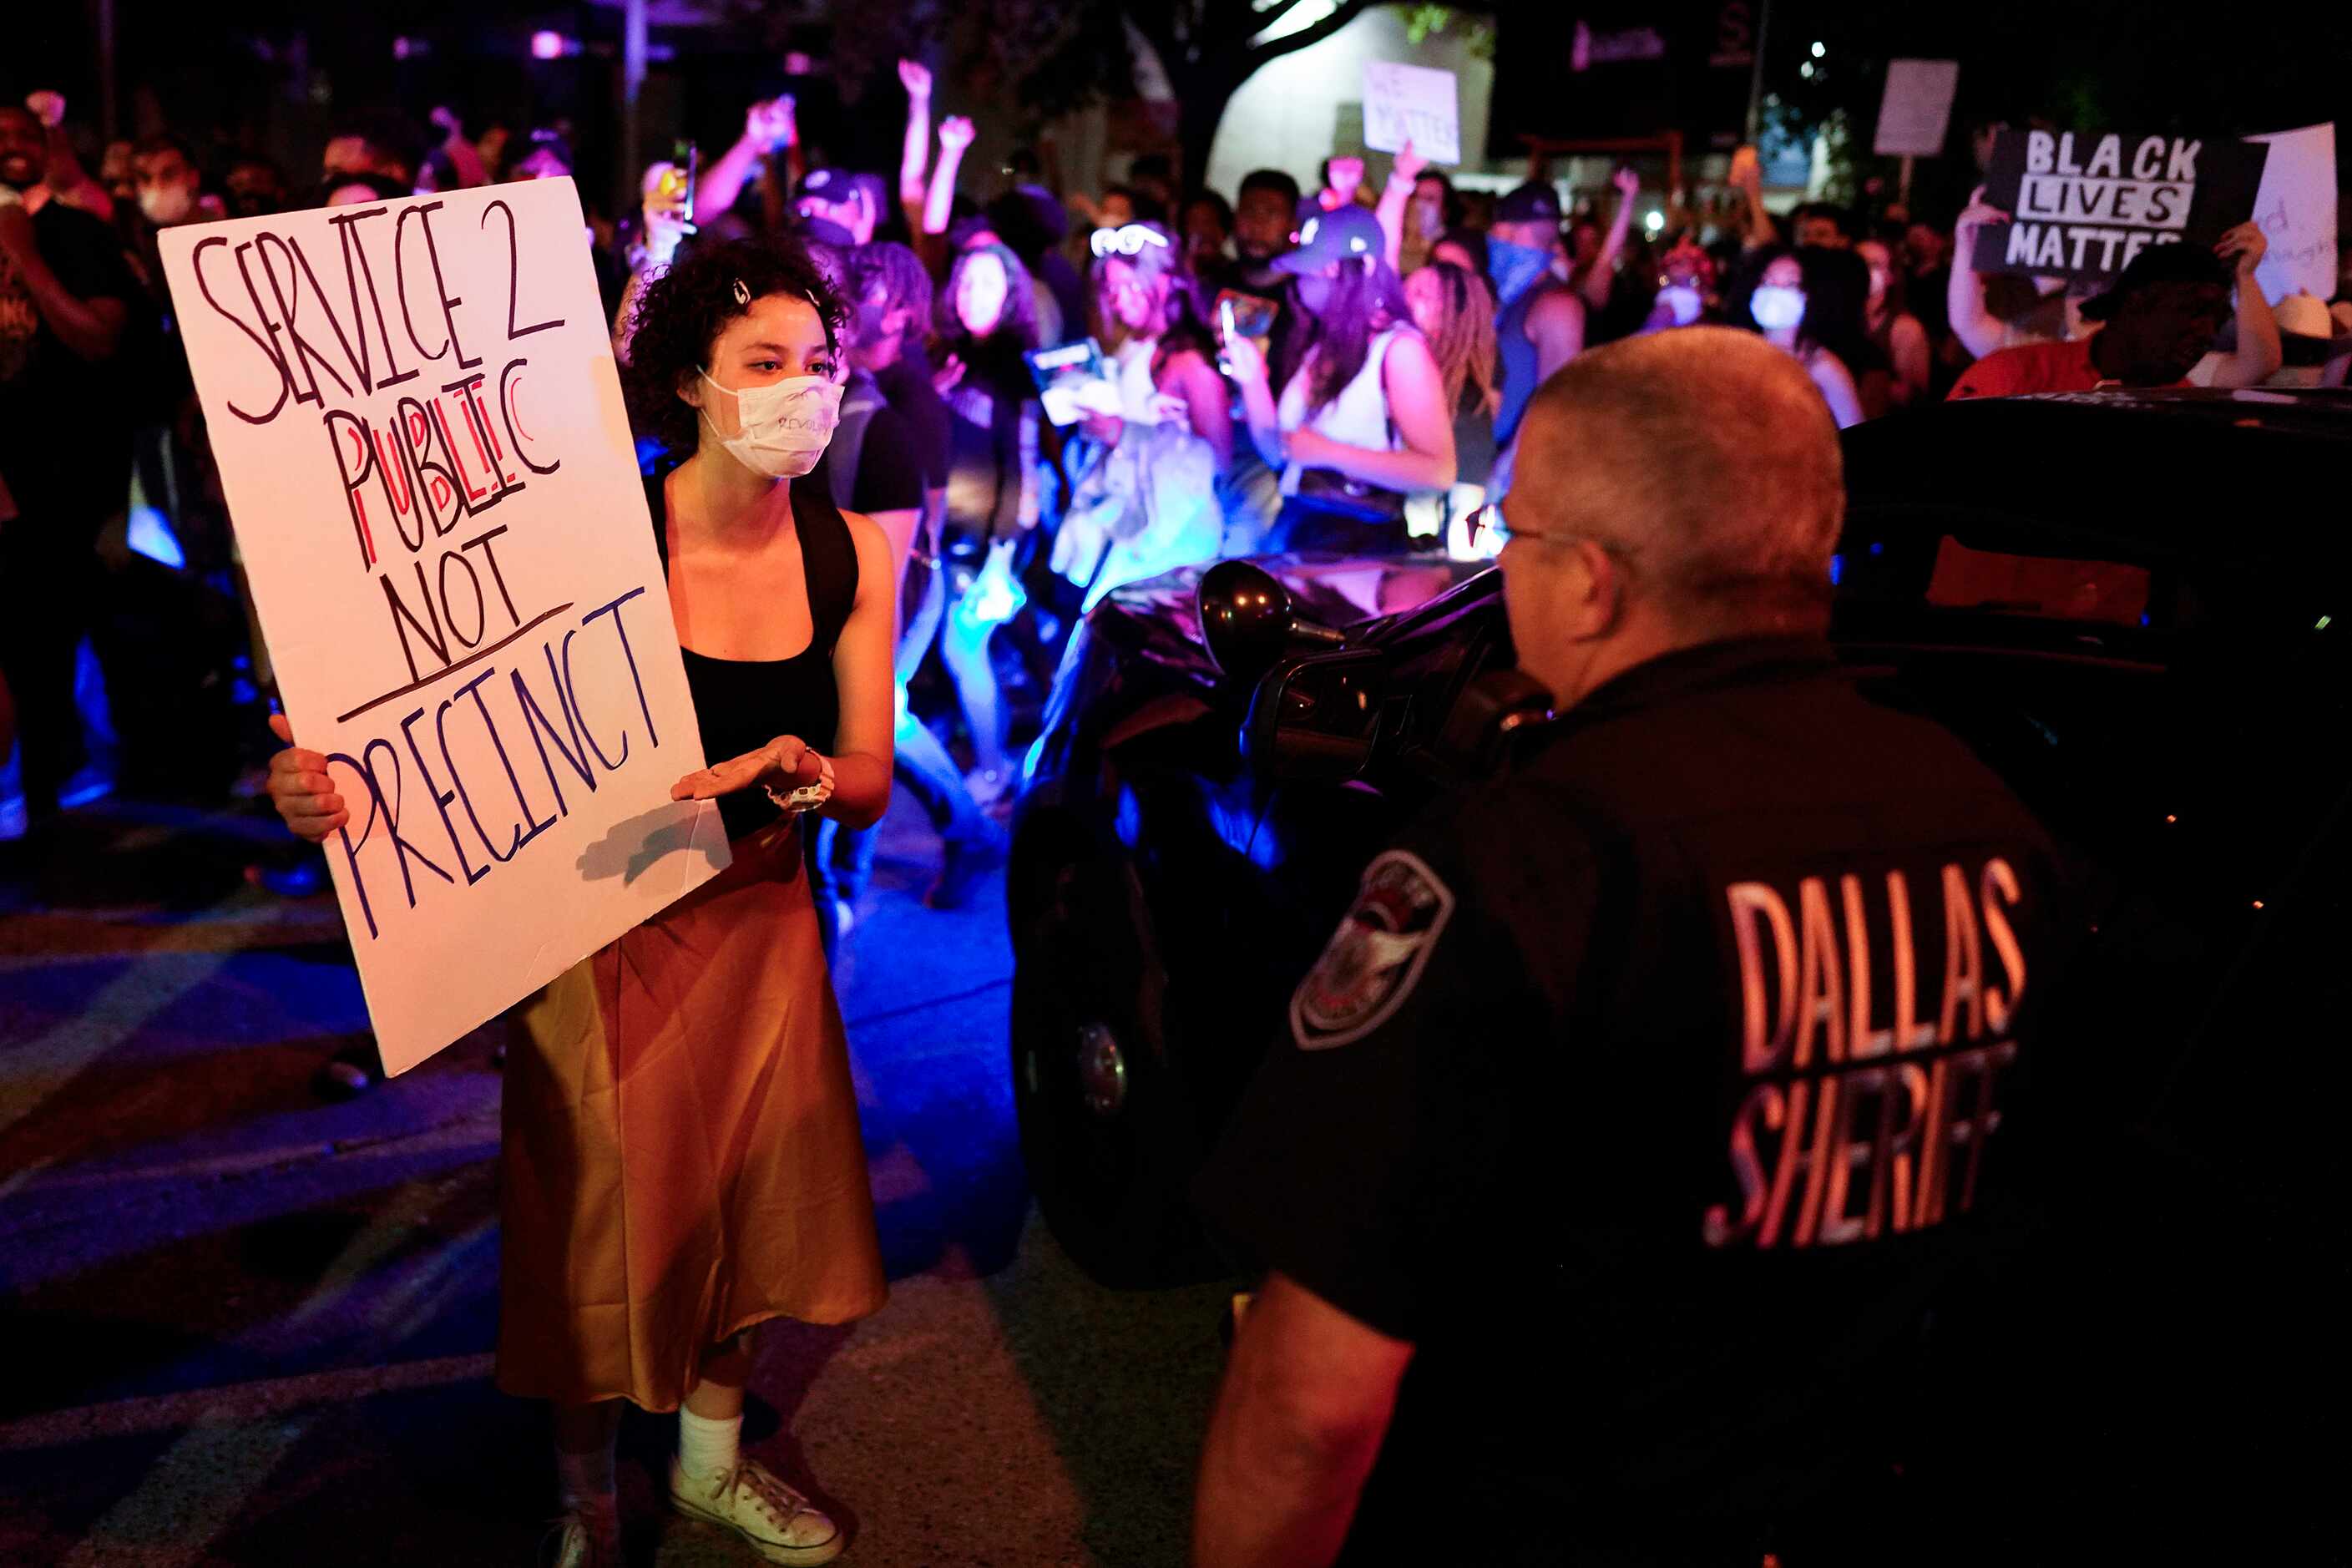 A woman confronts a Dallas County SheriffÕs deputy during a protest against police brutality...